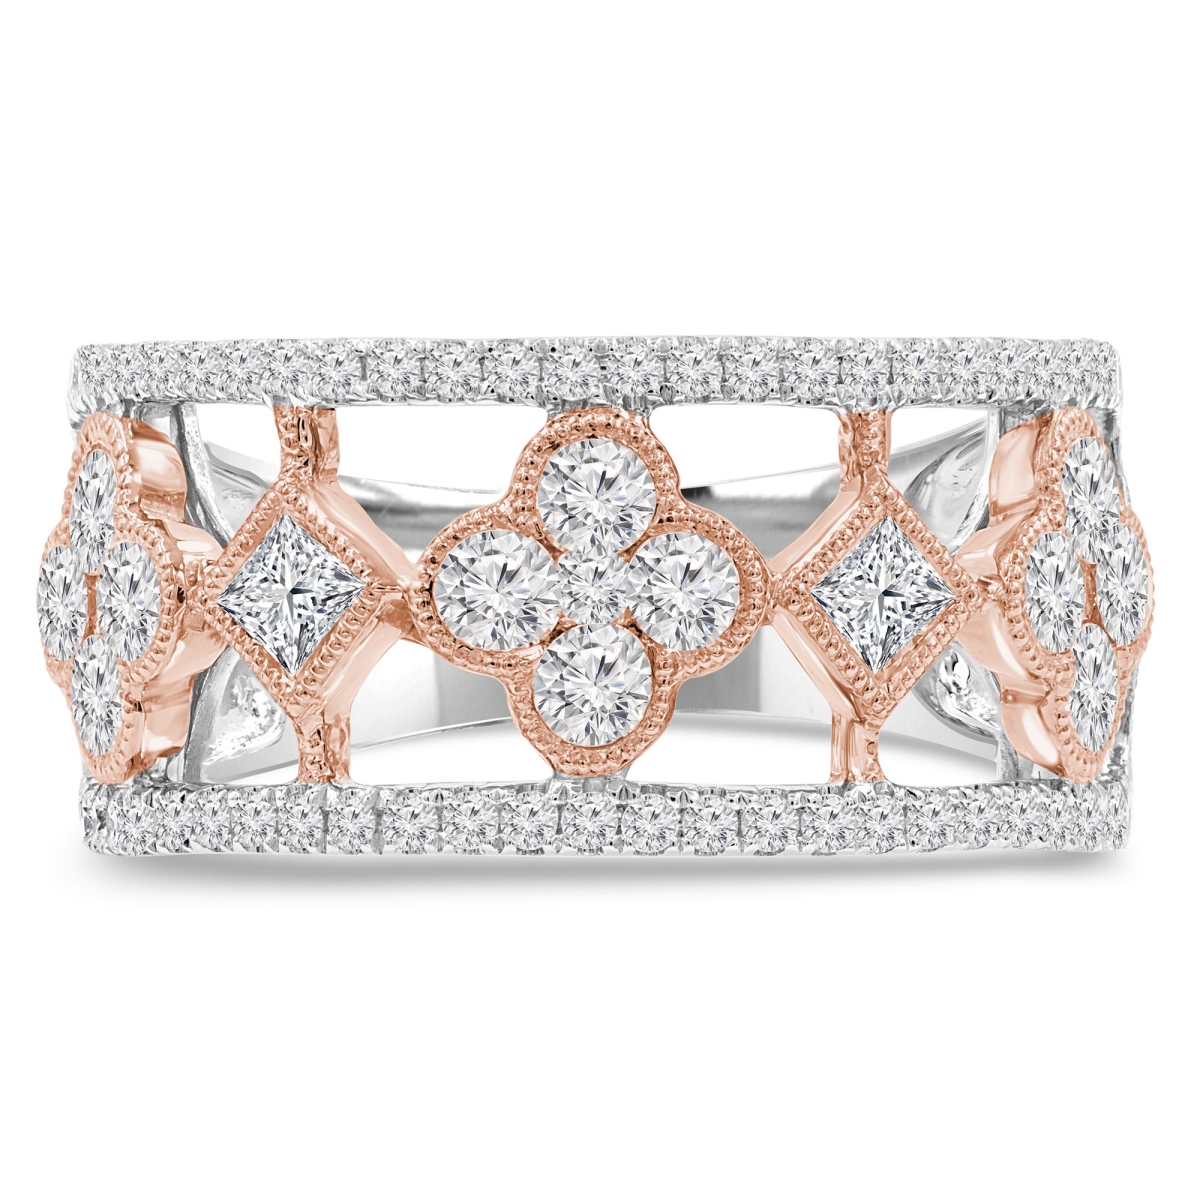 Picture of Majesty Diamonds MDR210138-5.5 1.13 CTW Princess Diamond Cocktail Ring in 14K Two-Tone Gold - Size 5.5